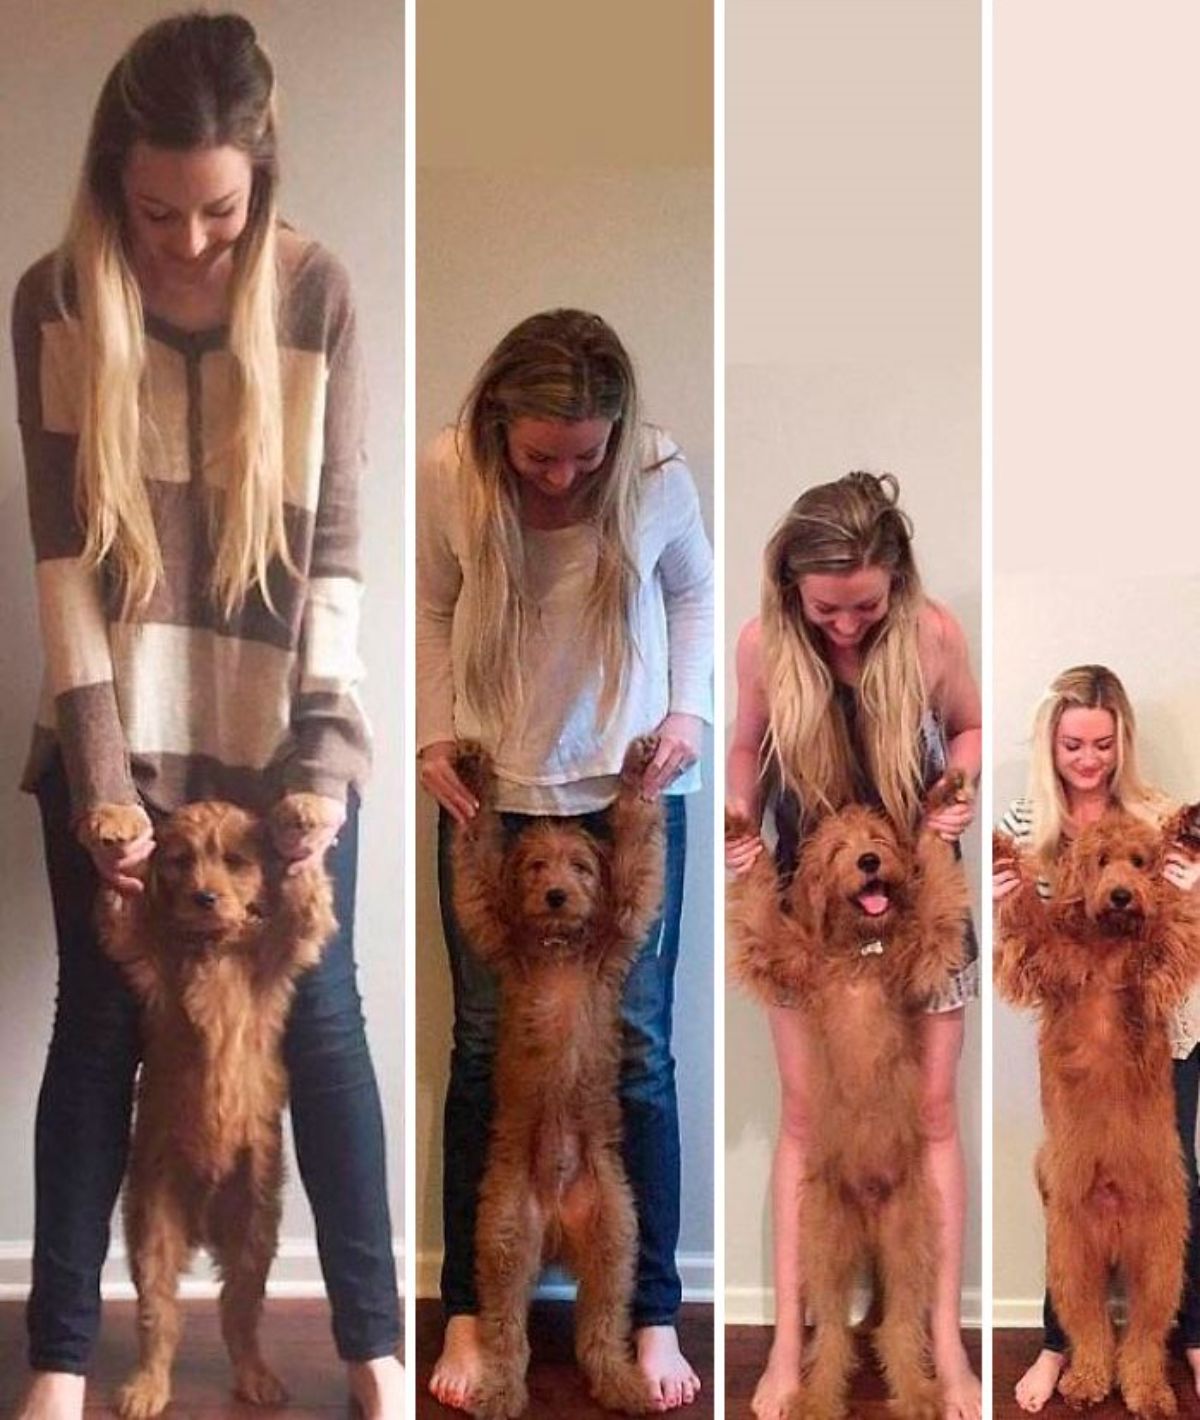 4 photos of a woman posing with a golden doodle being held with only its hind legs on the floor showing the growth process of the dog